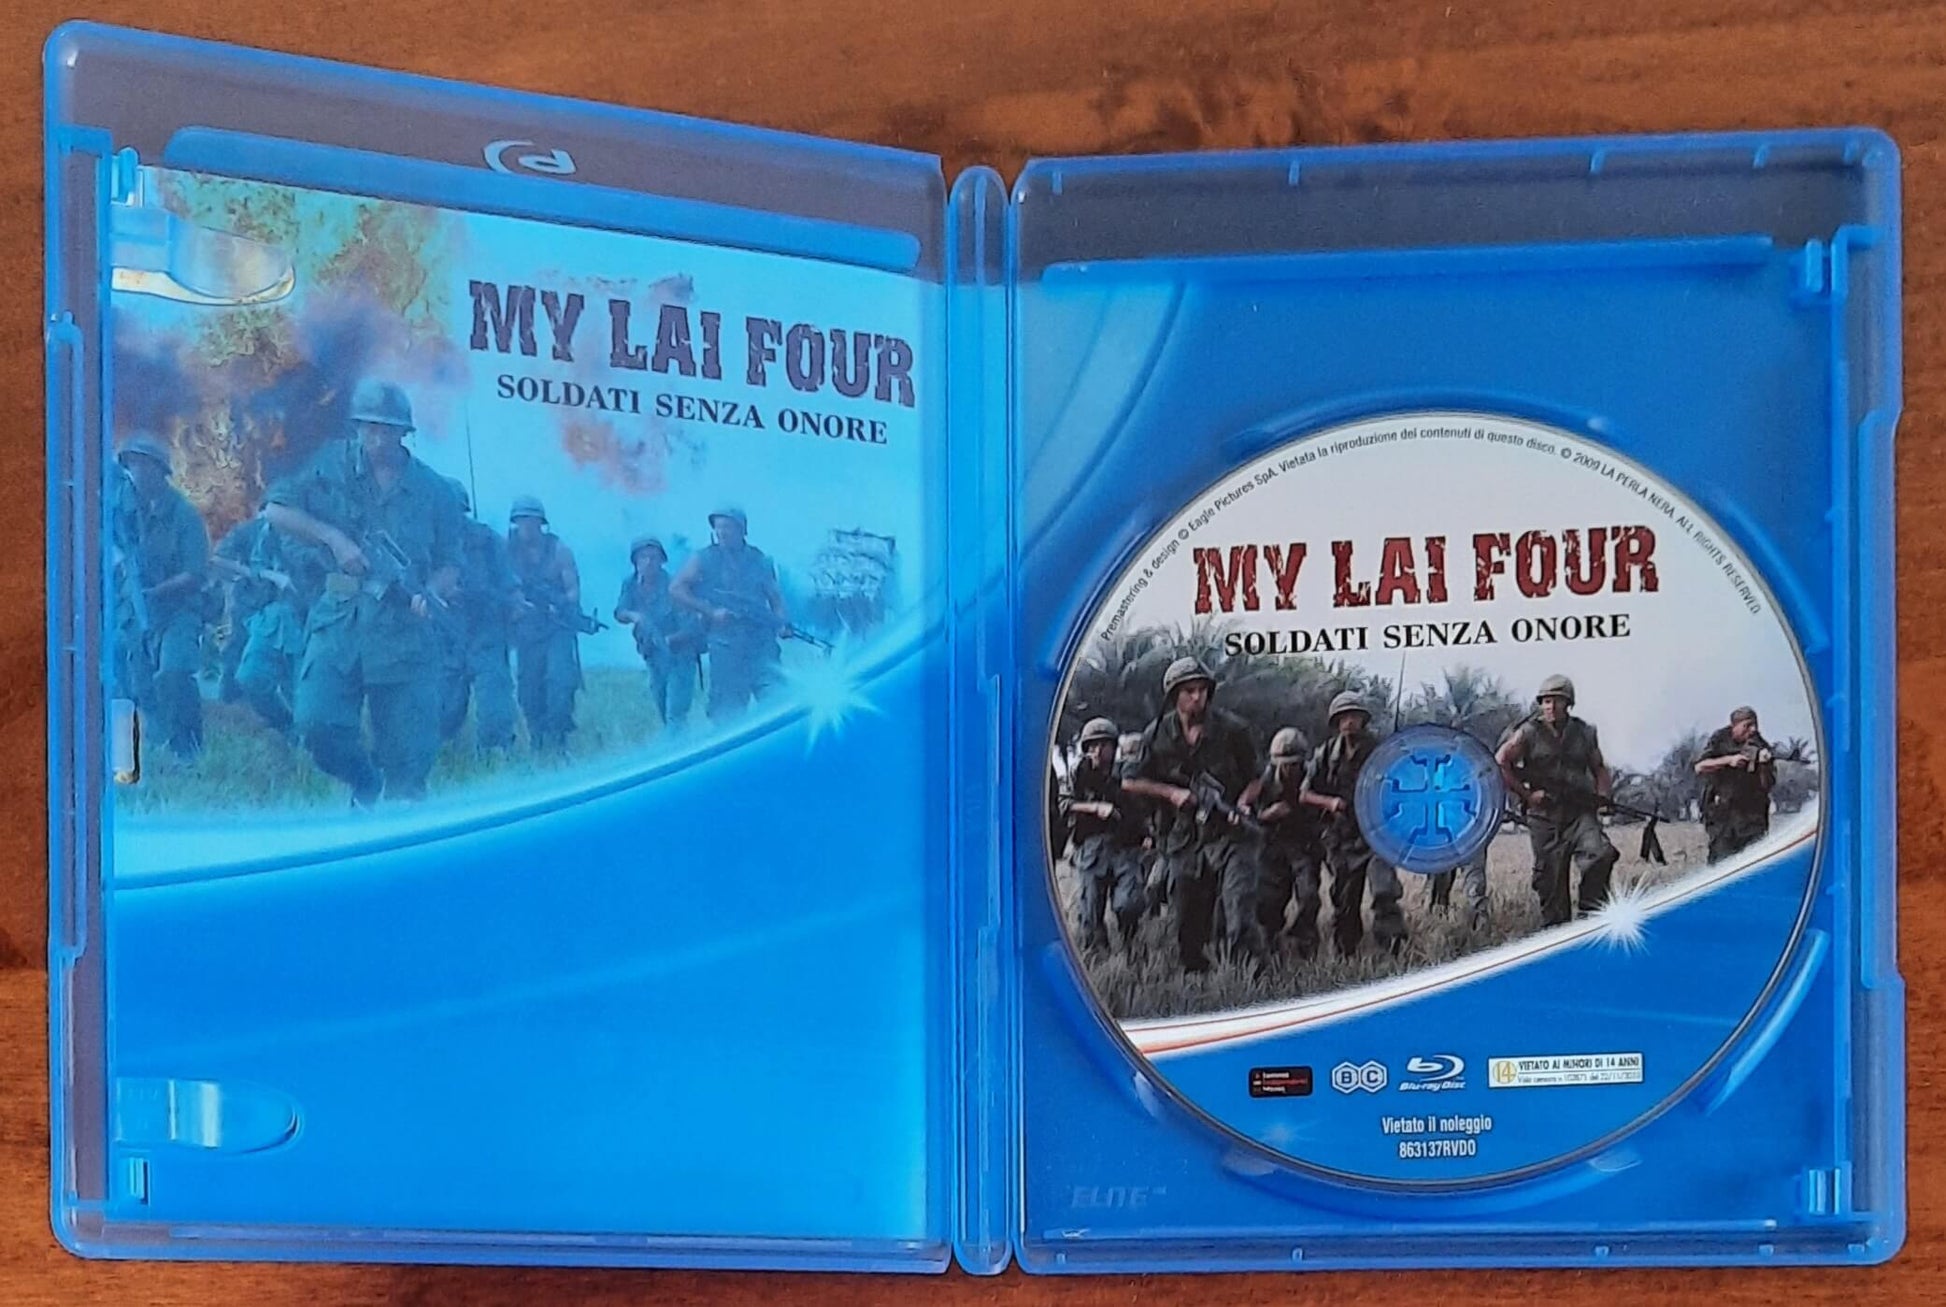 Blu-ray: My Lay Four. Soldati senza onore - 2010